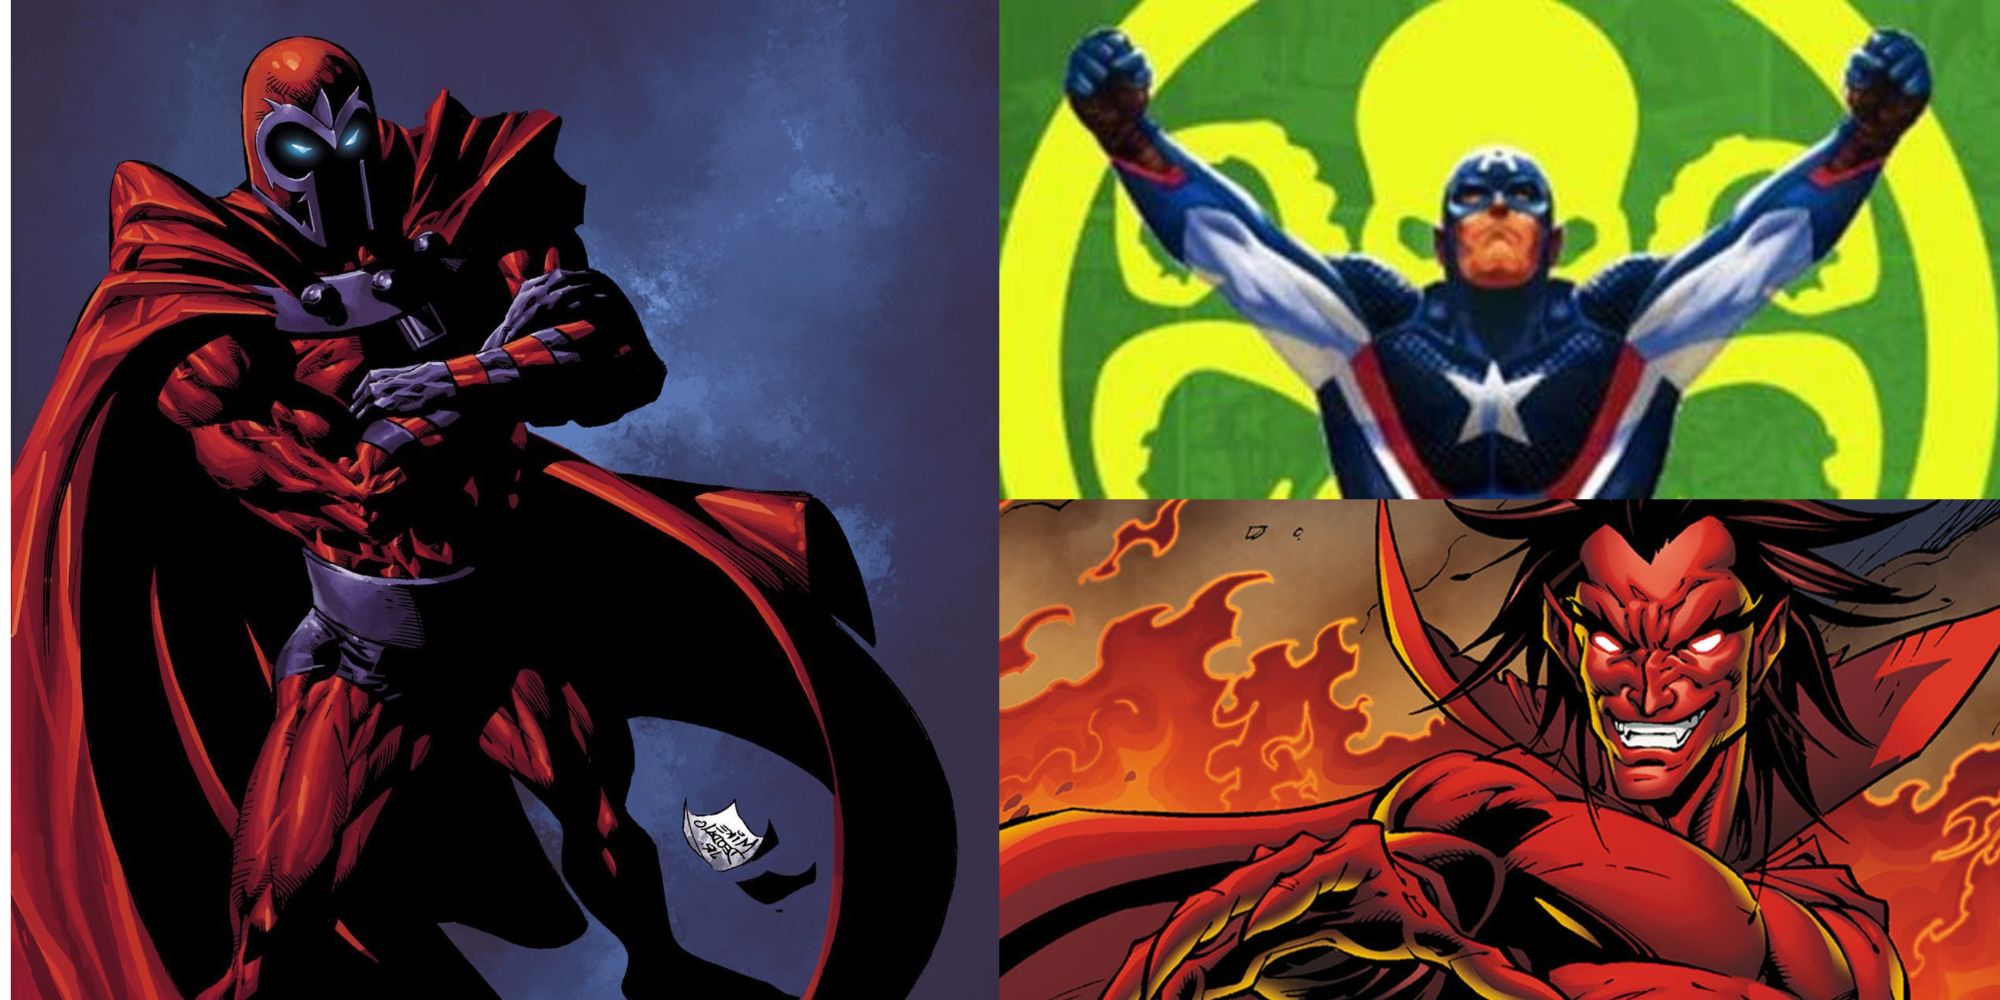 Clockwise from left: Mike Deodato's Magneto, Hydra Cap saluting, and Mephisto amidst fire